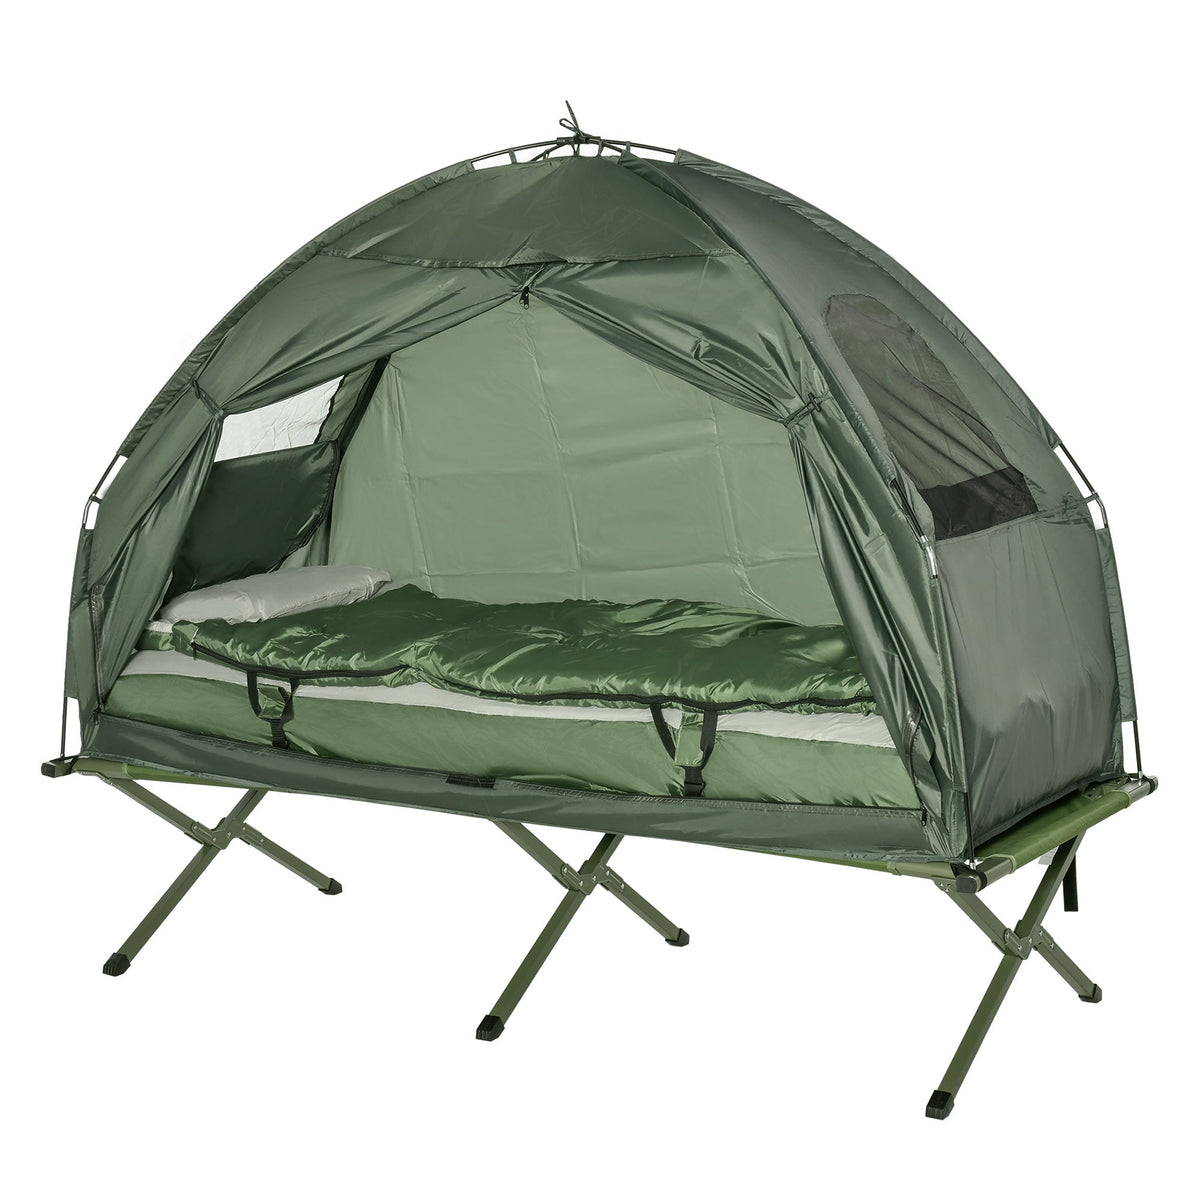 Outsunny 1 person Foldable Camping Tent w/Sleeping Bag Air Mattress Outdoor Hiking Picnic Bed cot w/Foot Pump - TovaHaus